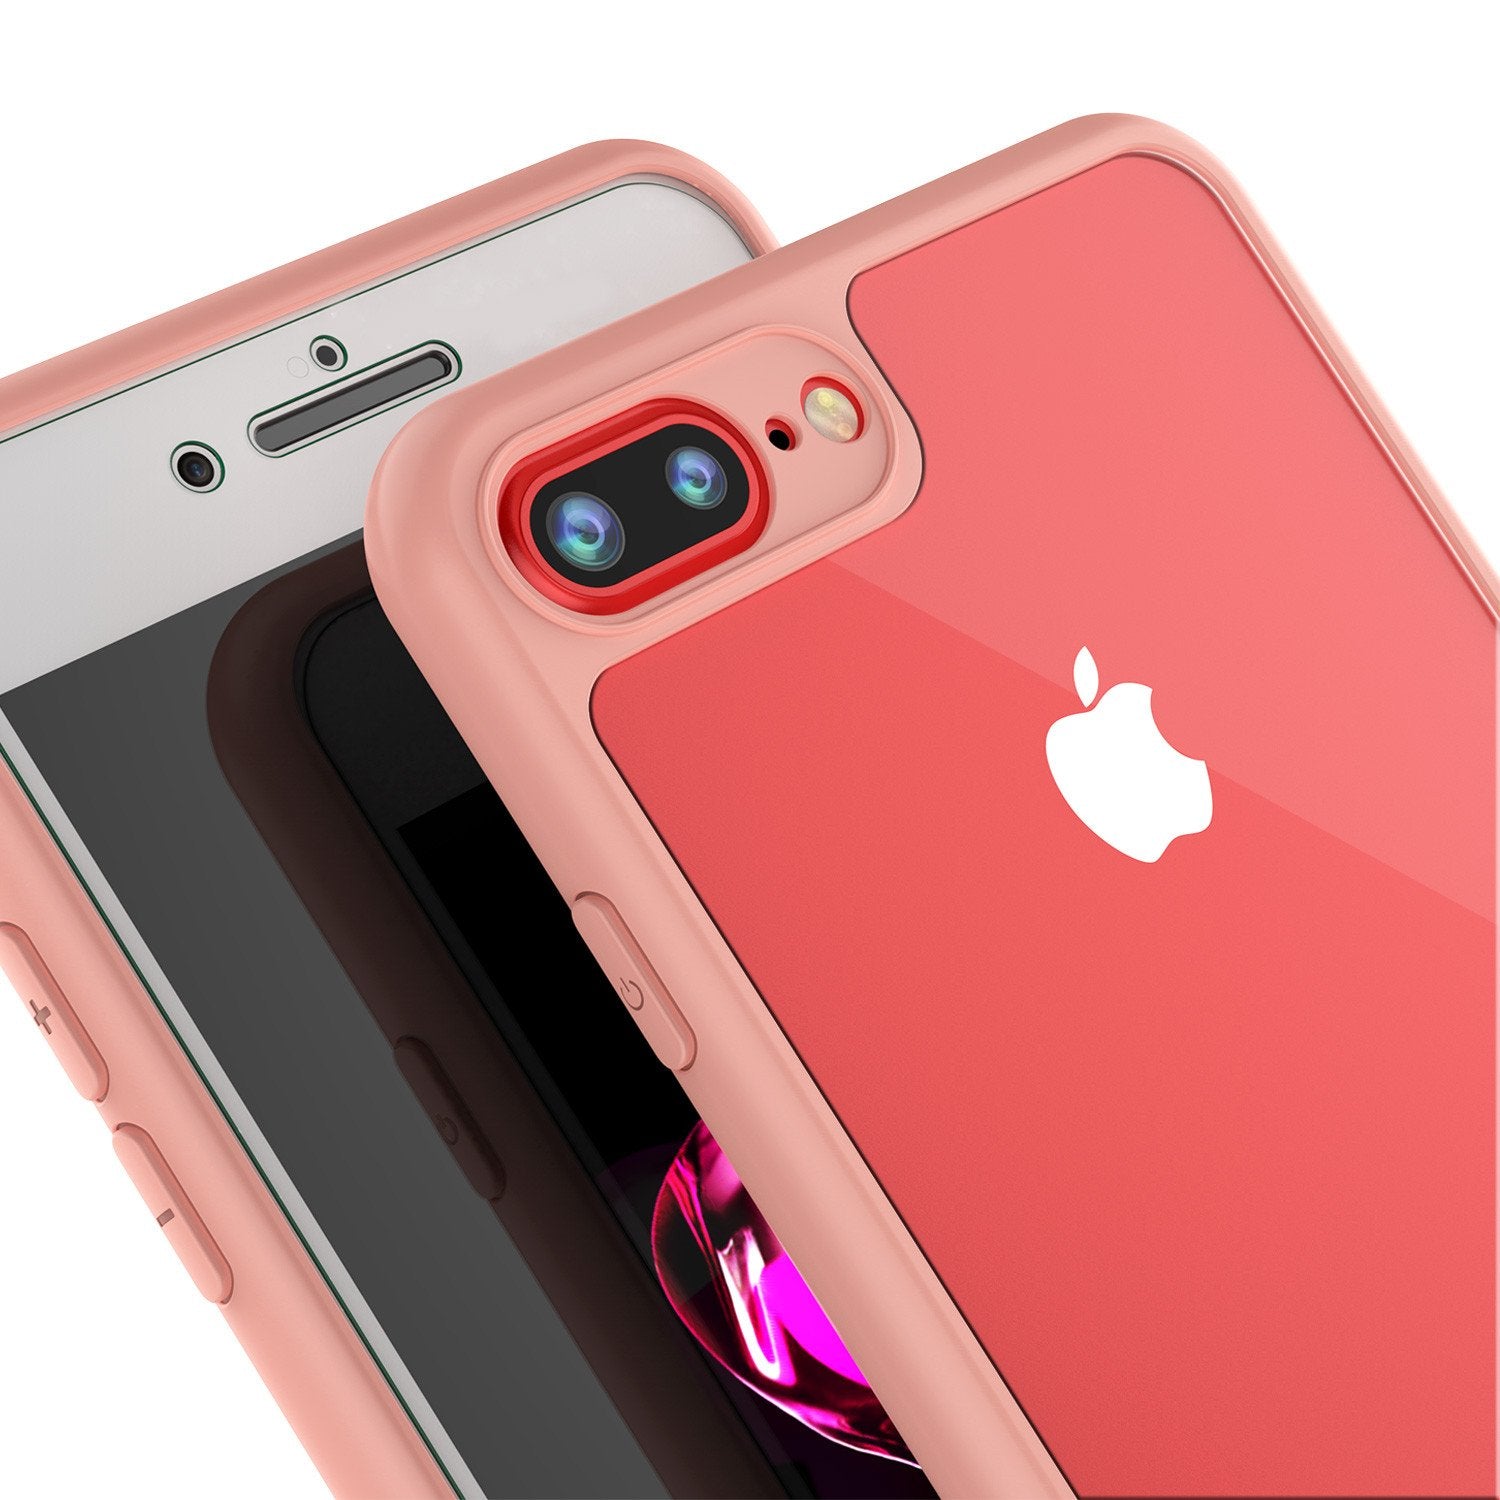 For Apple iPhone 8 Plus Case, Slim Hybrid Dual Layer Case Cover for iPhone  8 Plus - Rose Gold